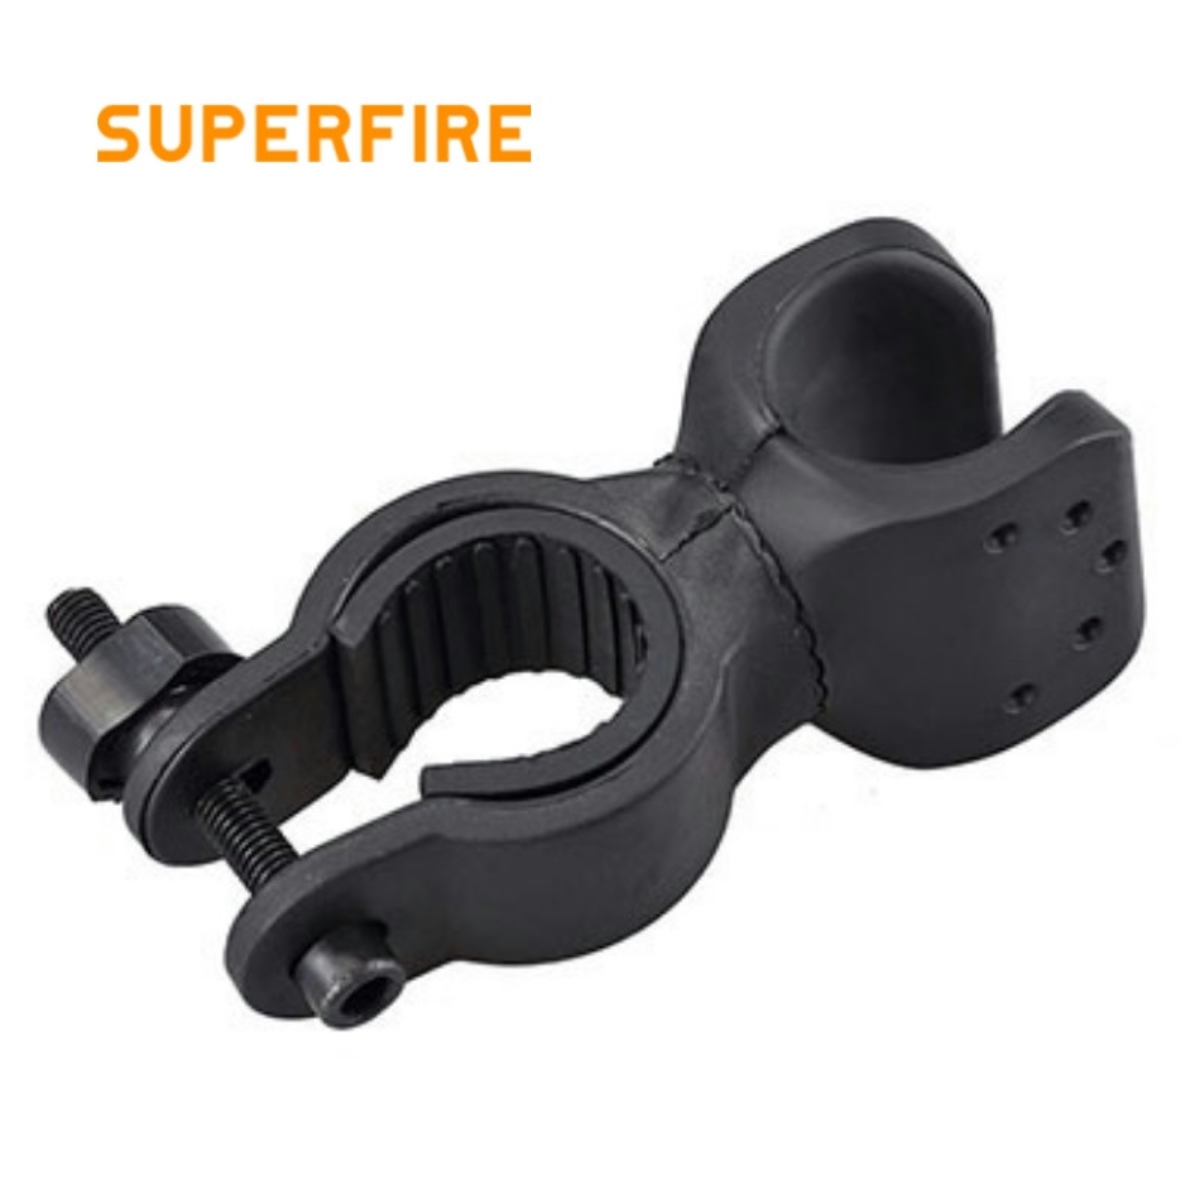 SUPERFIRE Bicycle holder for flashlight